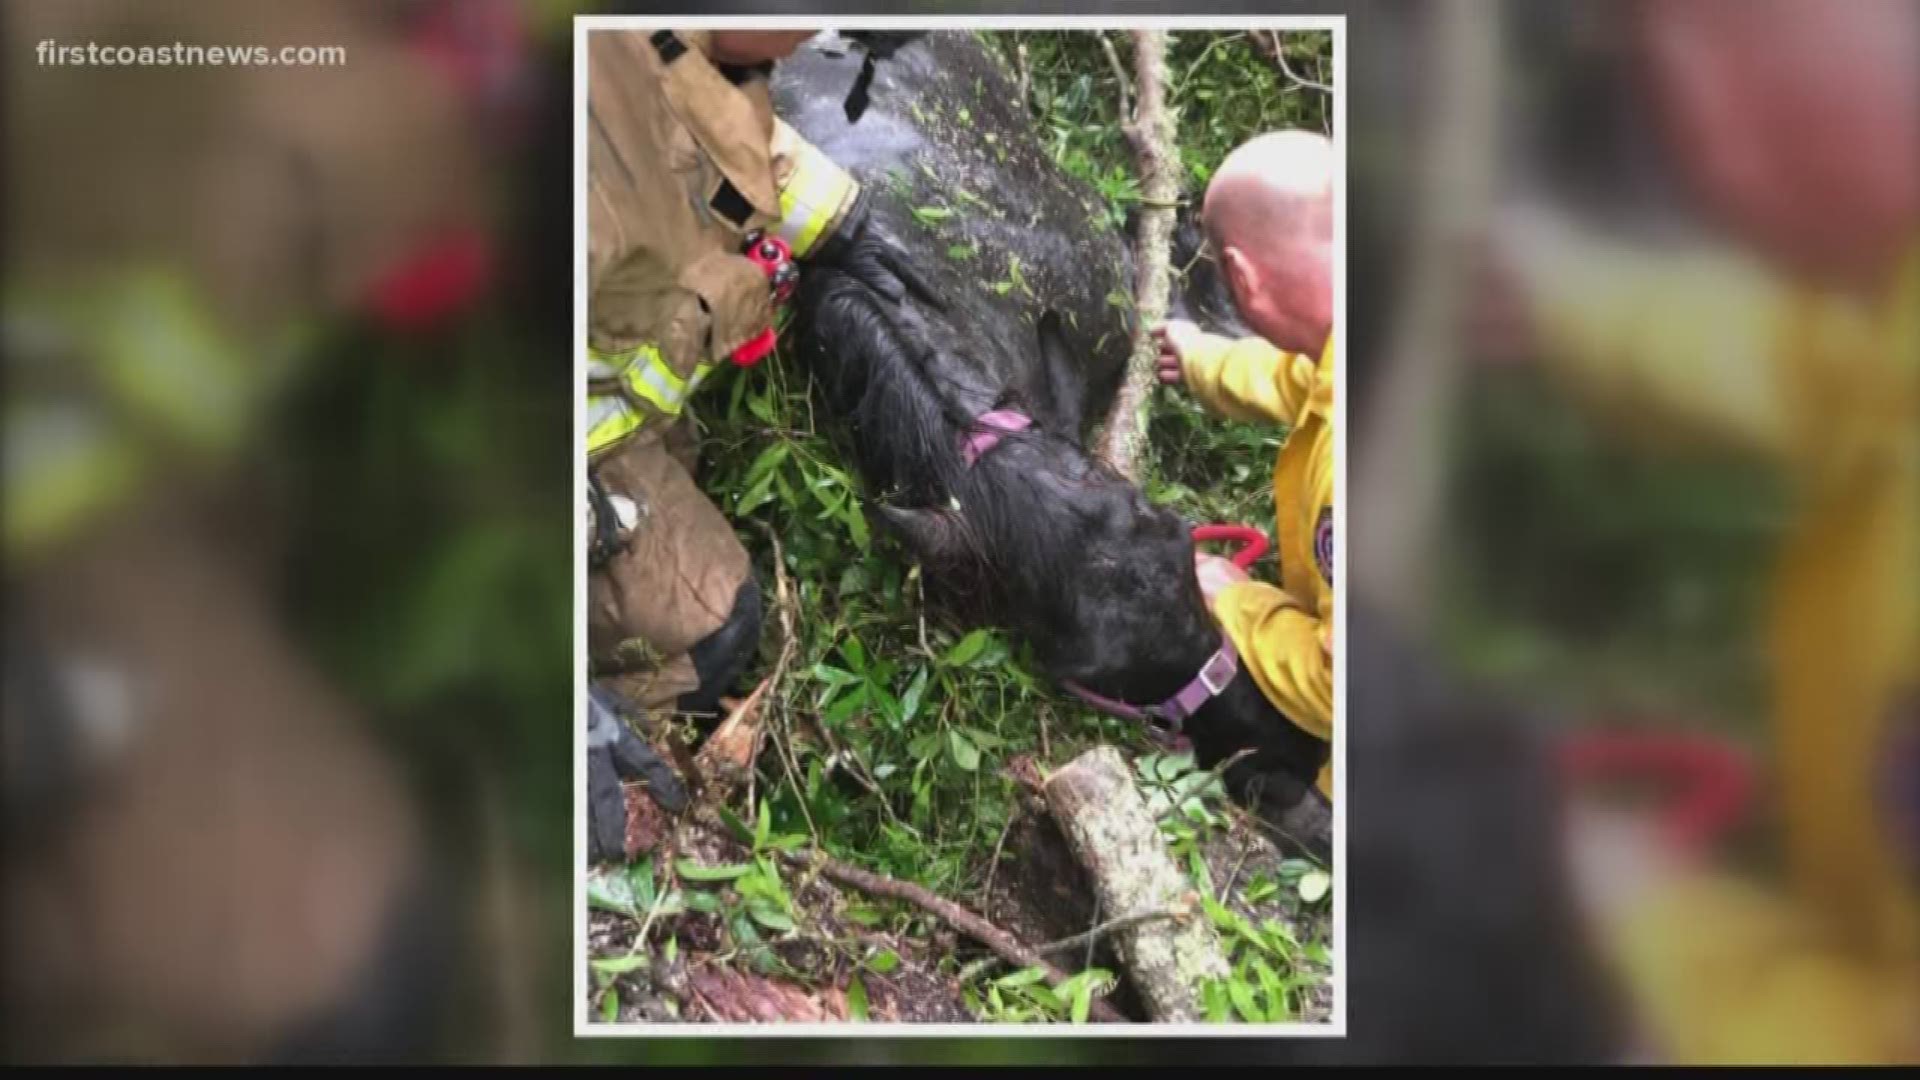 Firefighters said the 14-year-old Friesian horse named Sietska, was pinned under an oak tree after the tree came down in Alachua County.